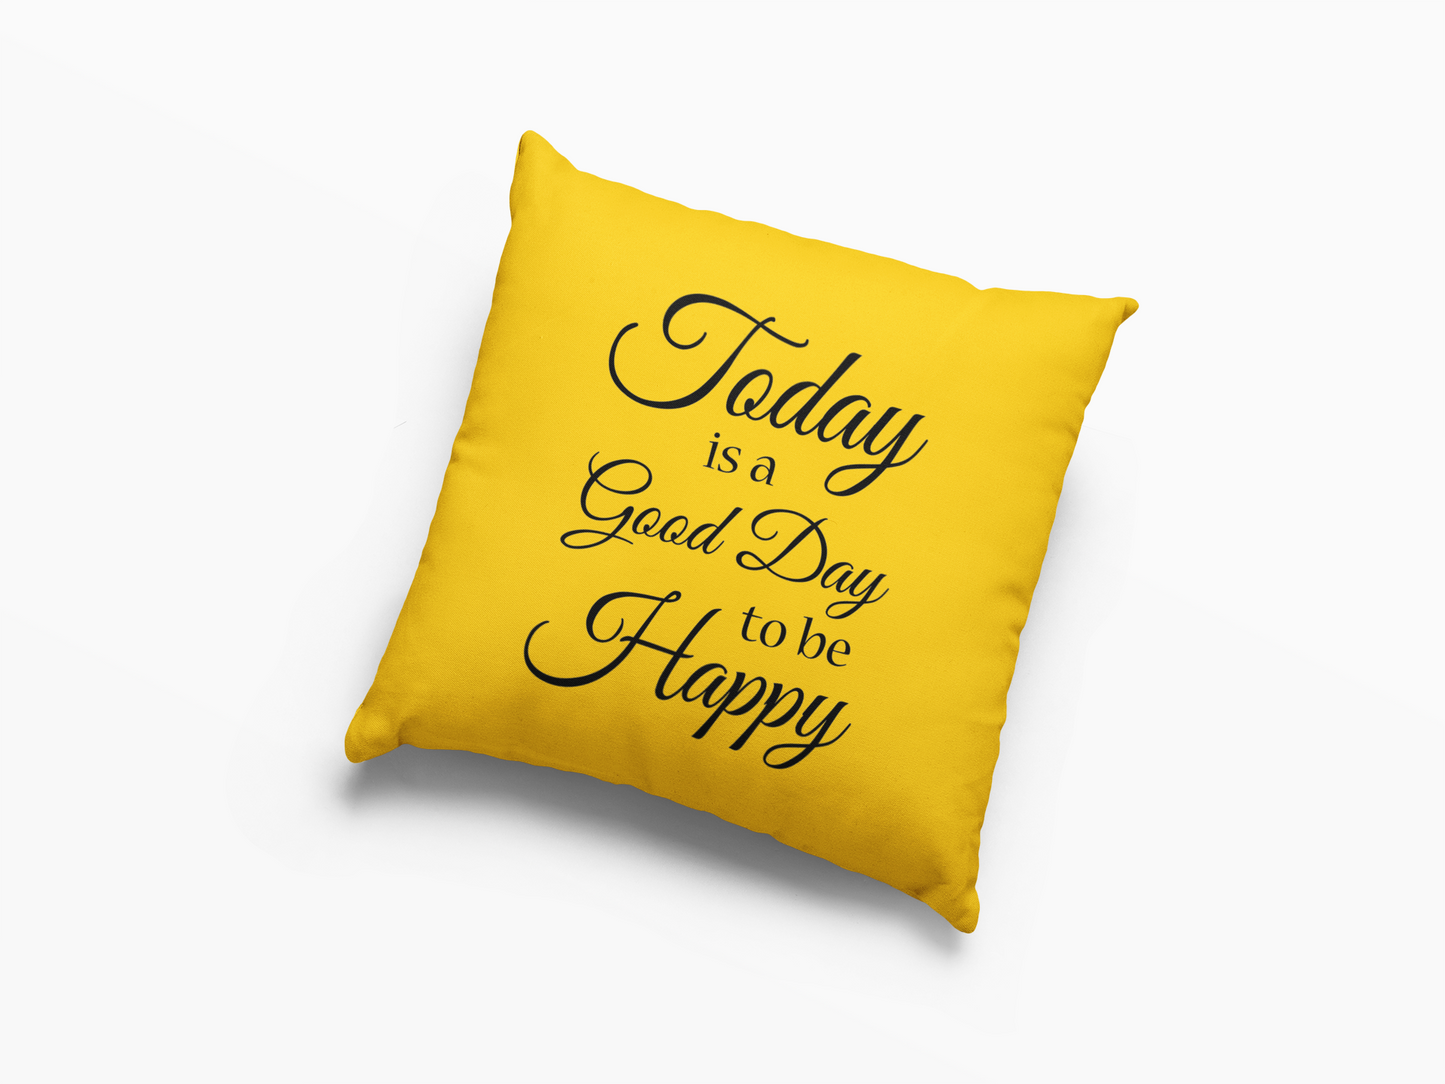 Today Is A Good Day  Printed Cushion